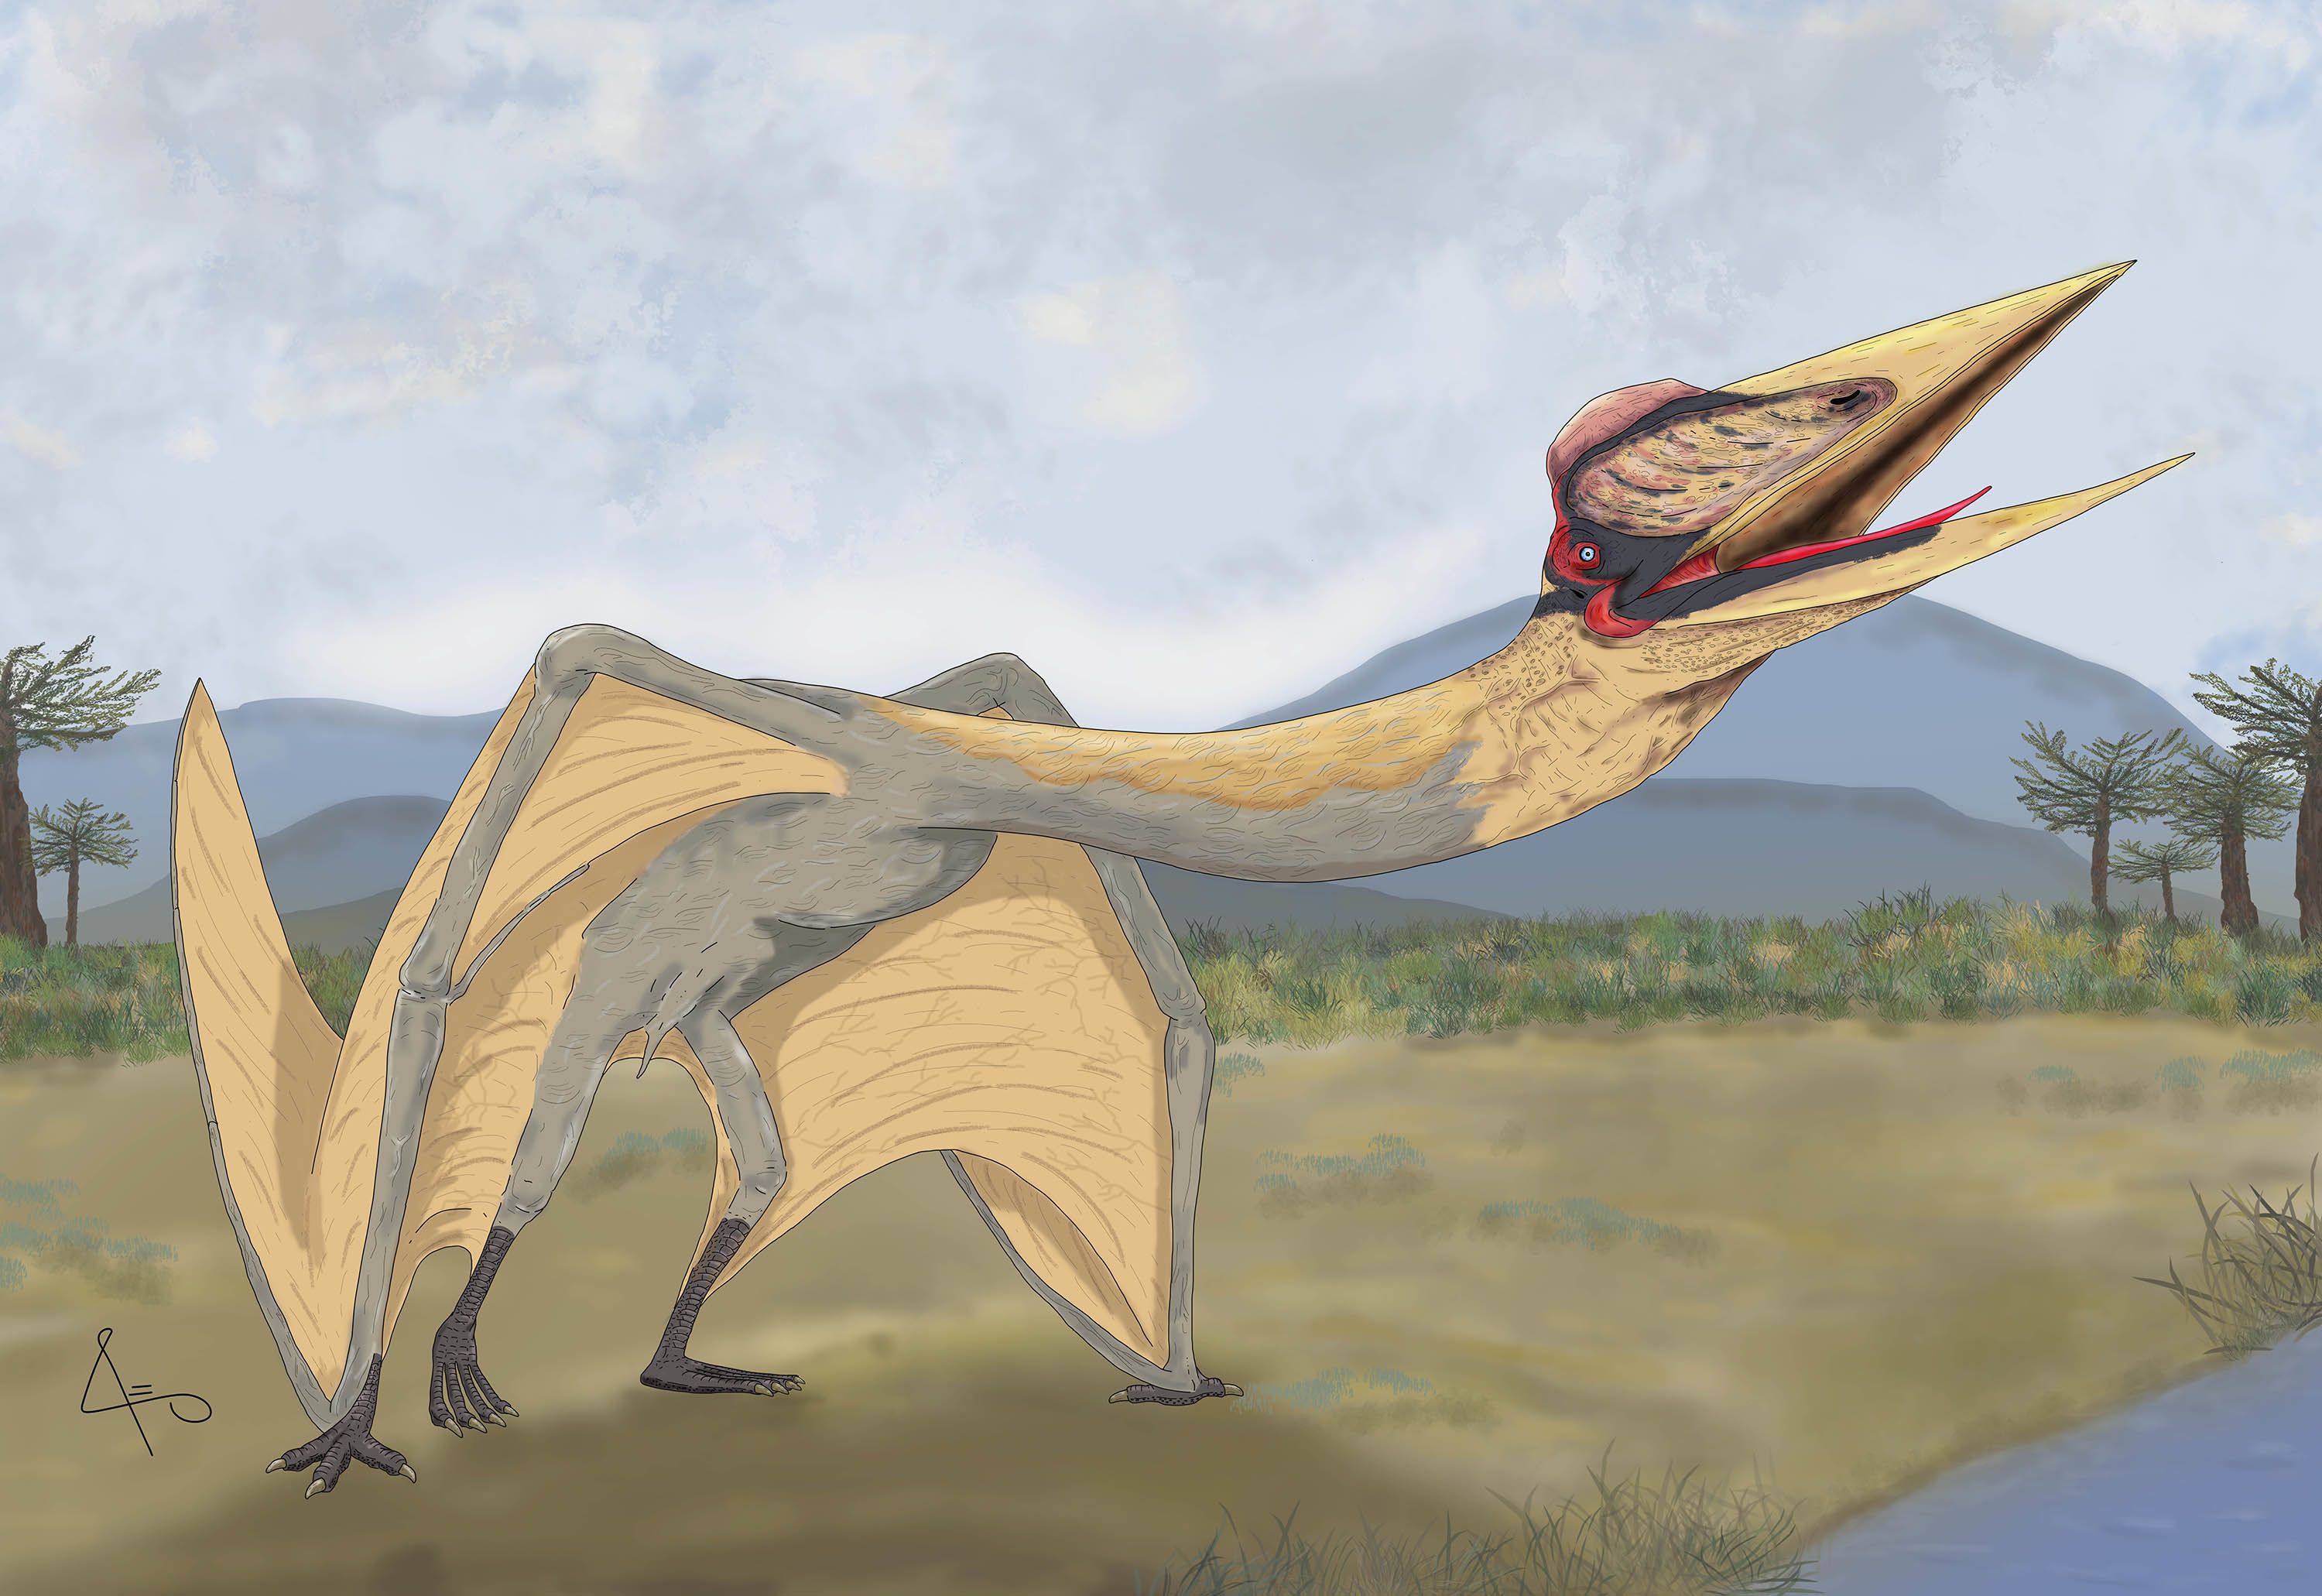 Pteranodon and beyond: the history of giant pterosaurs from 1870 onwards